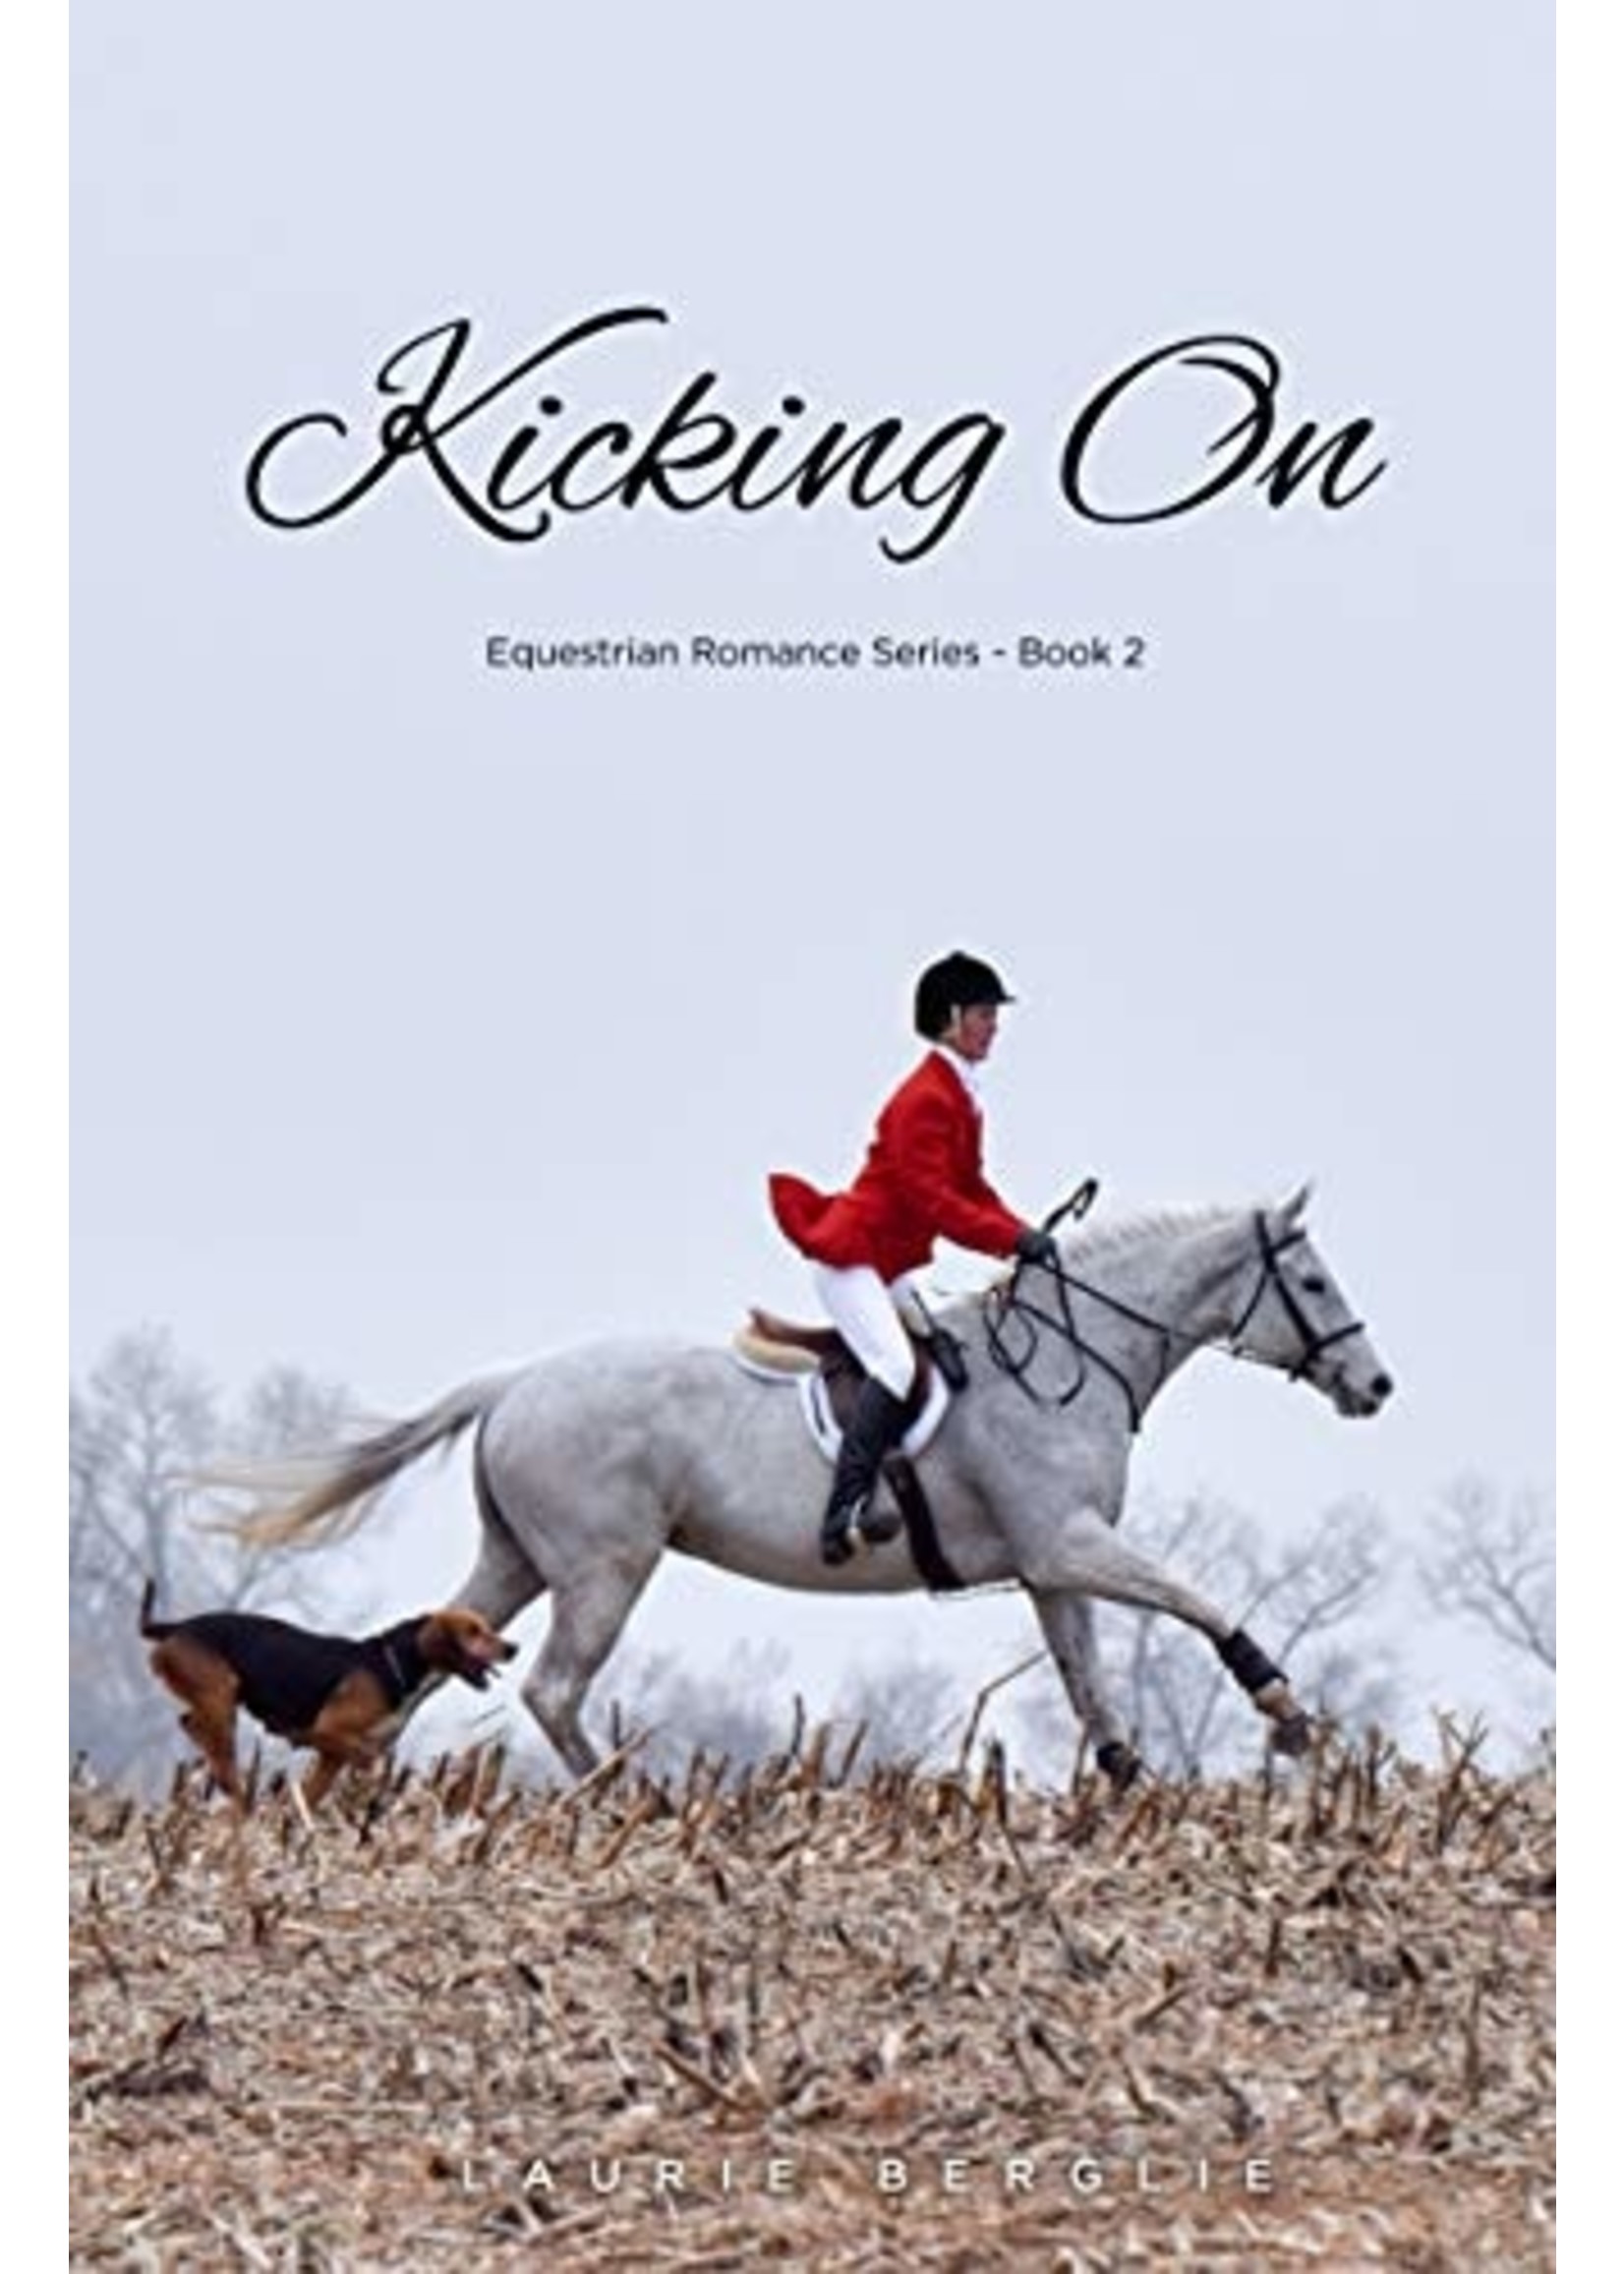 Kicking On, By Laurie Berglie